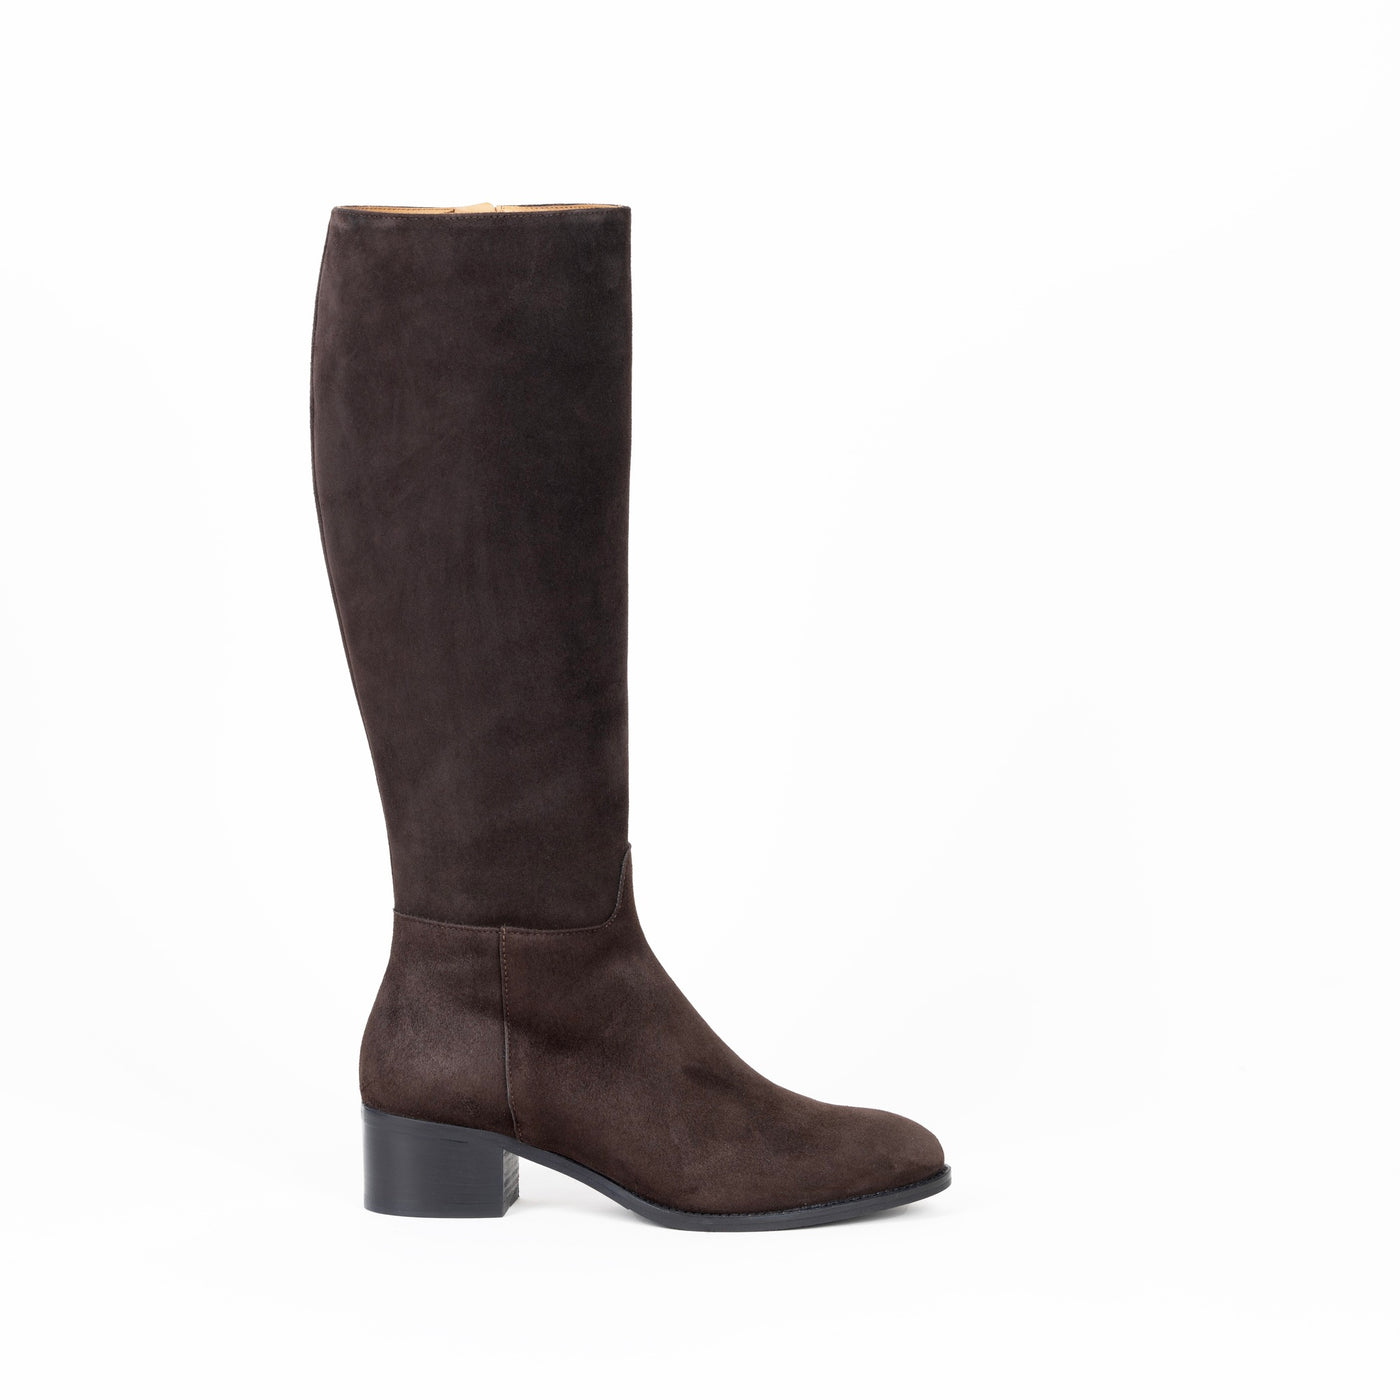 Gisele Boots in Brown Suede